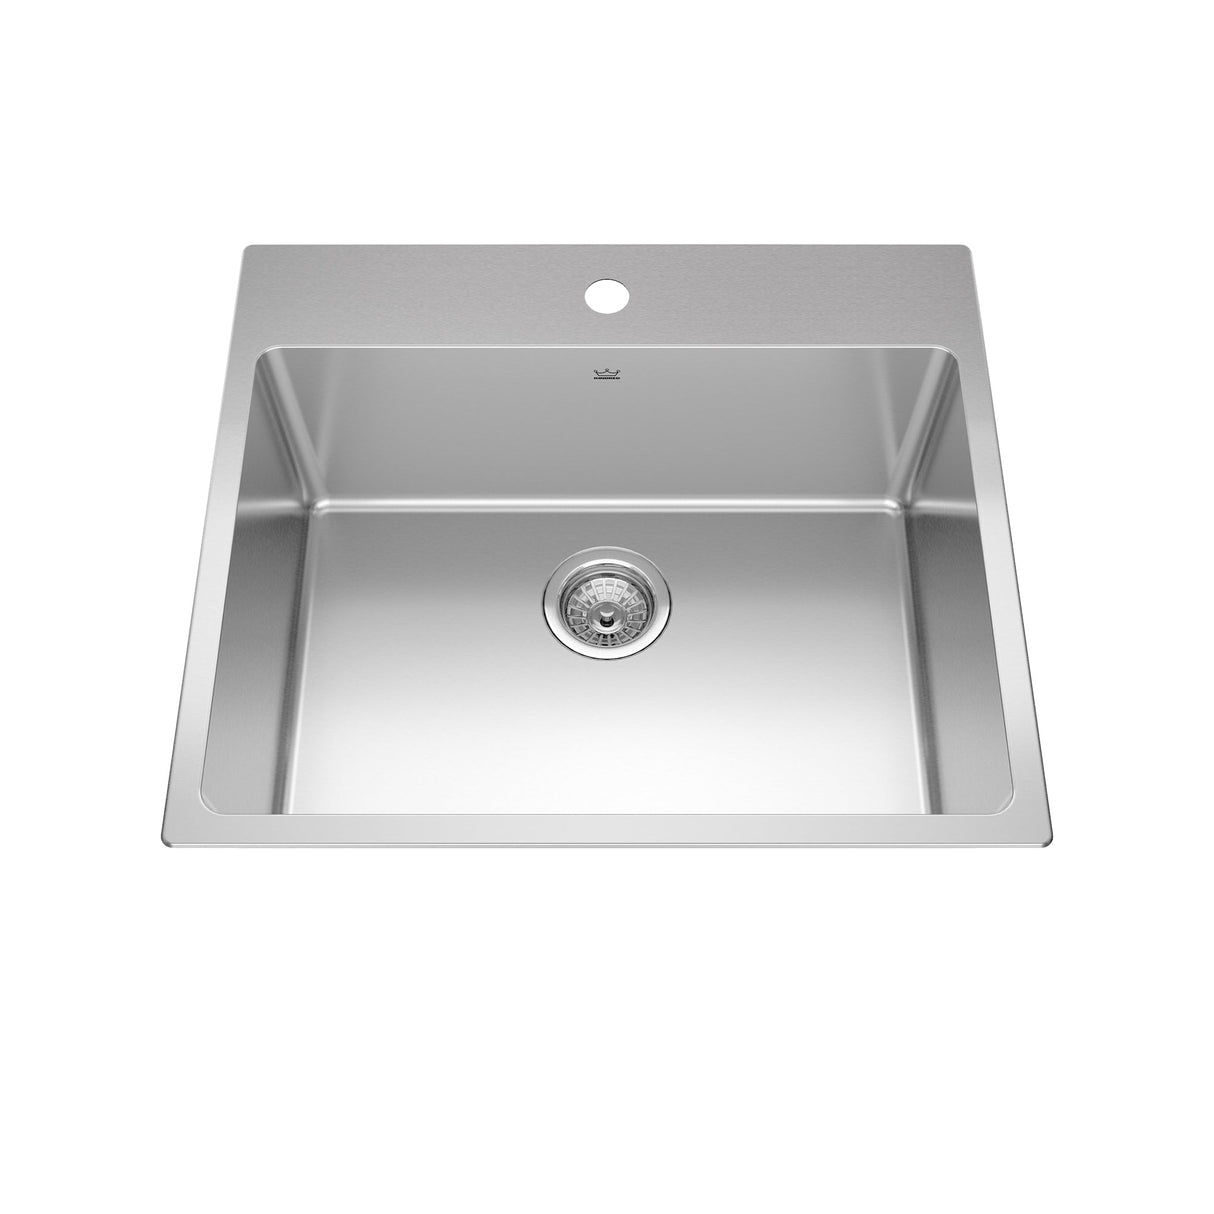 KINDRED BSL2225-9-1N Brookmore 25.1-in LR x 22.1-in FB x 9-in DP Drop in Single Bowl Stainless Steel Sink In Commercial Satin Finish